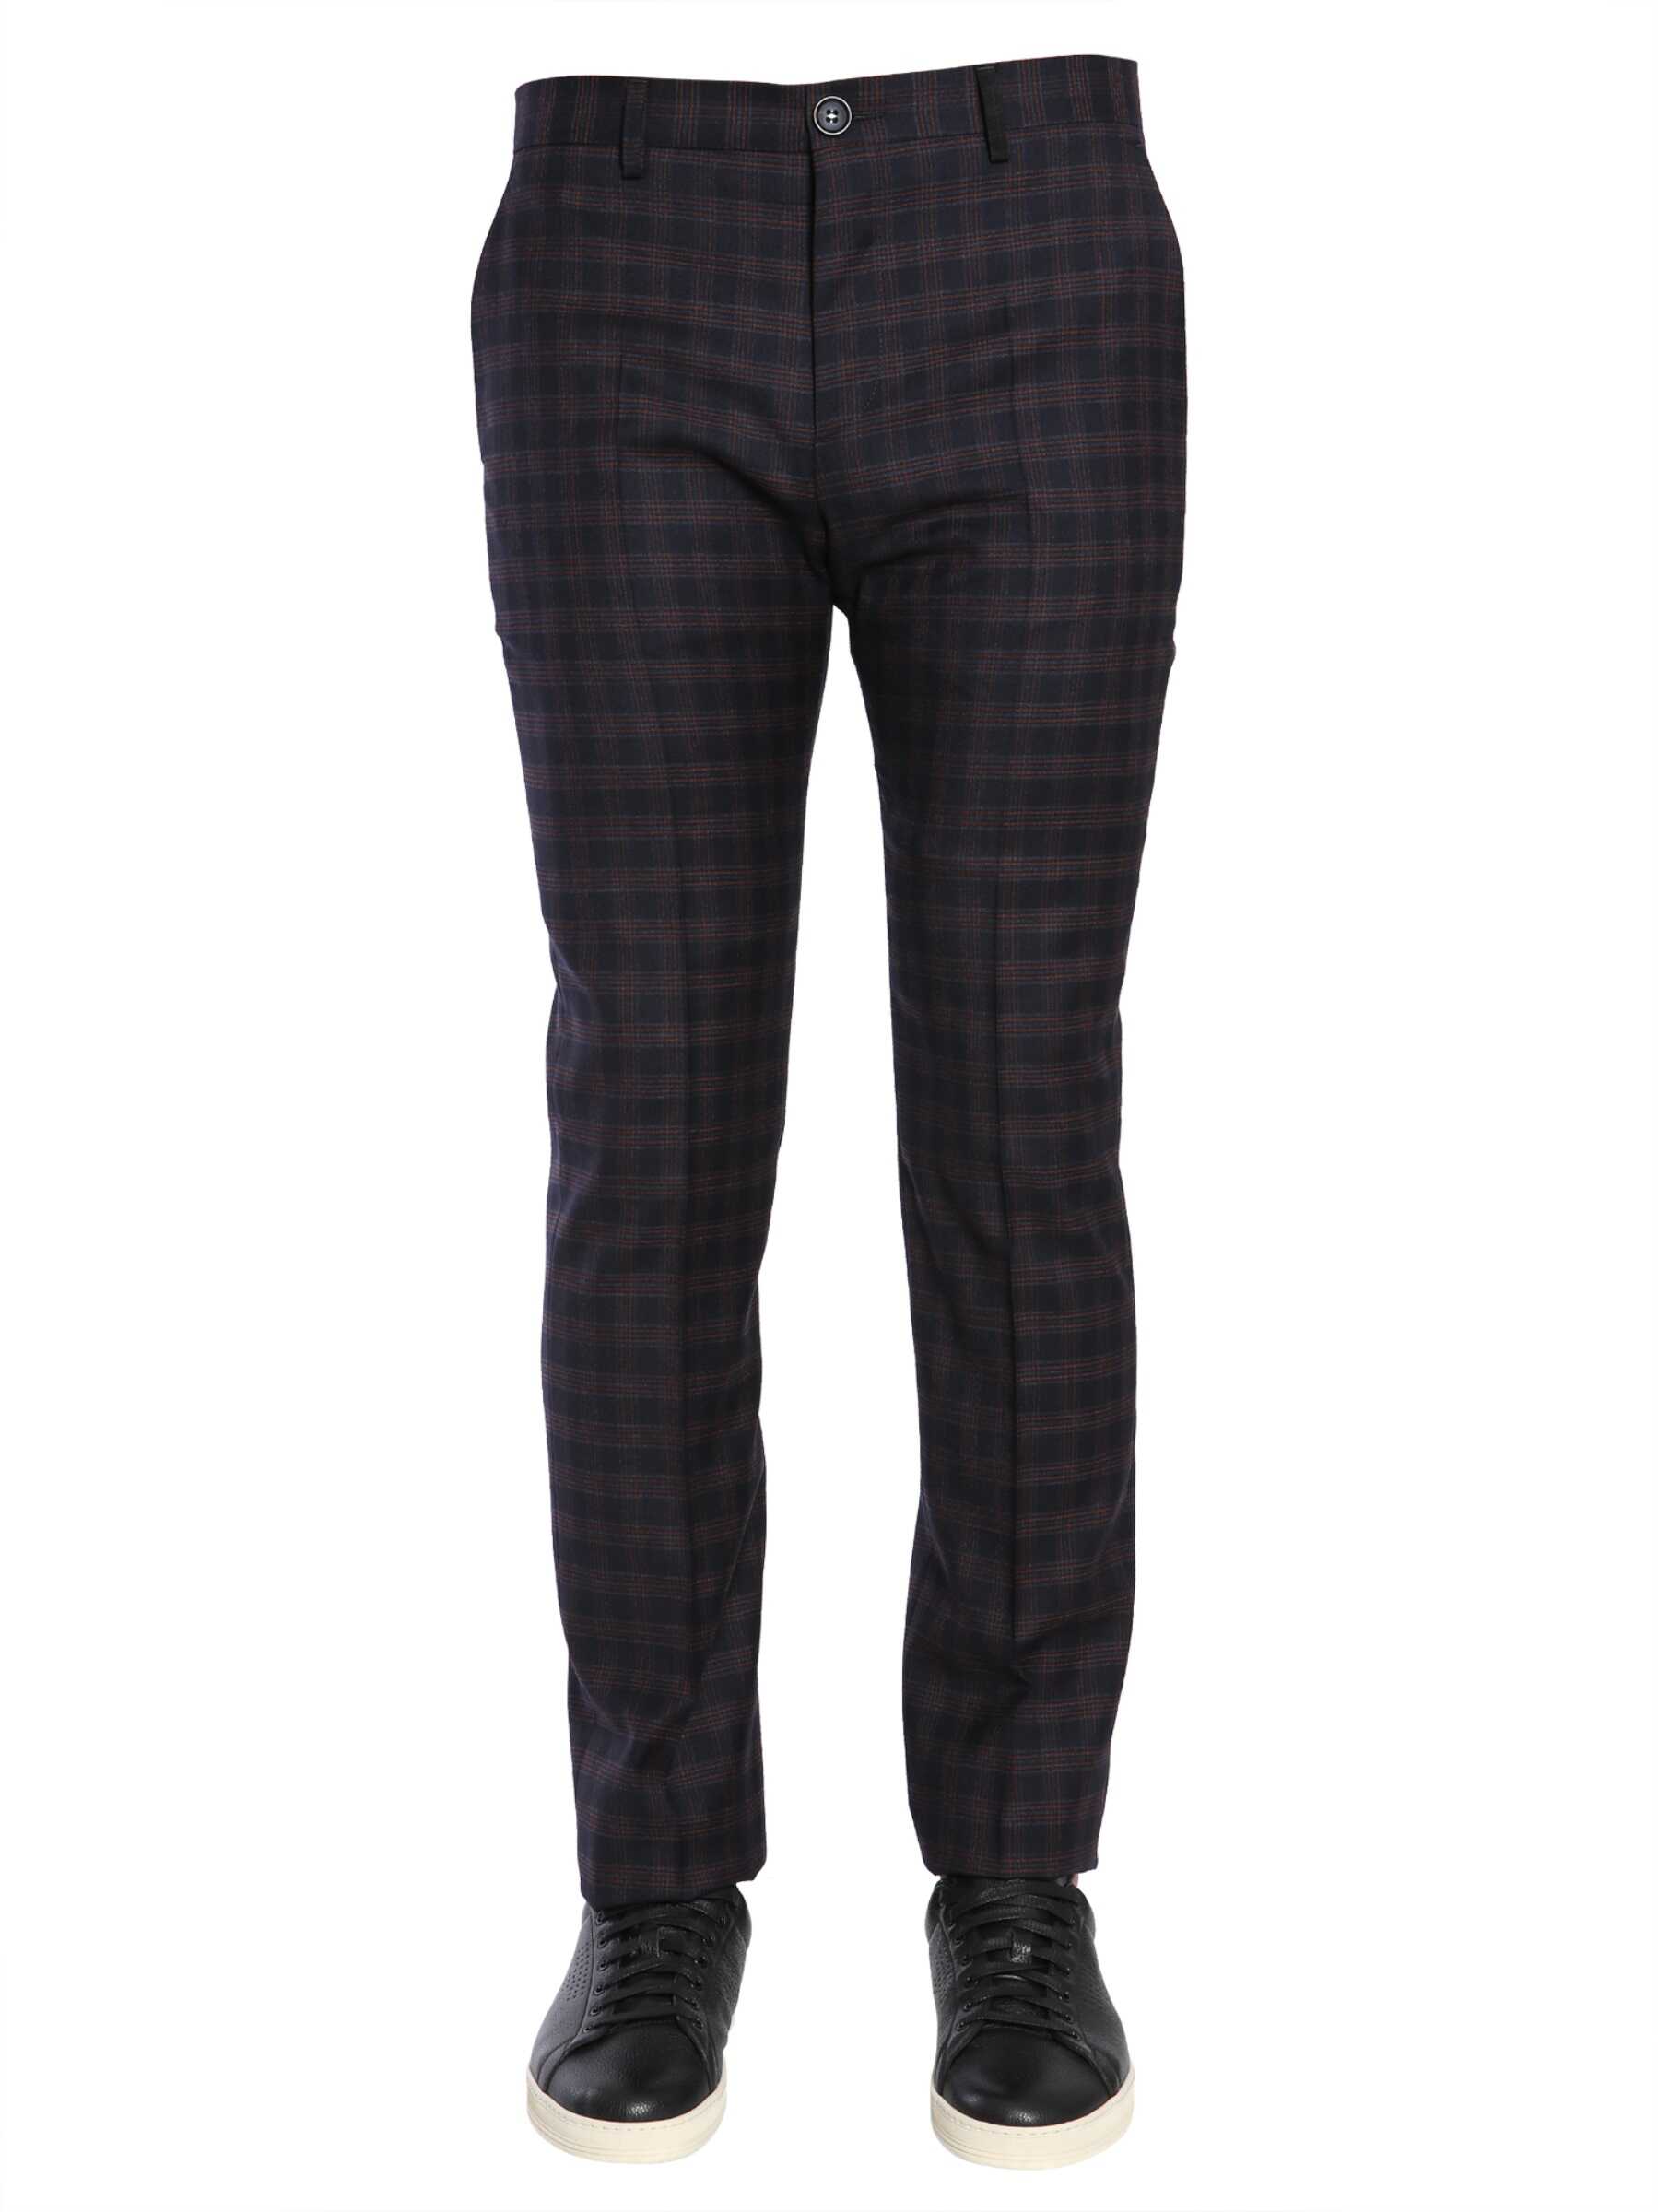 PS by Paul Smith Slim Fit Trousers BLUE image10